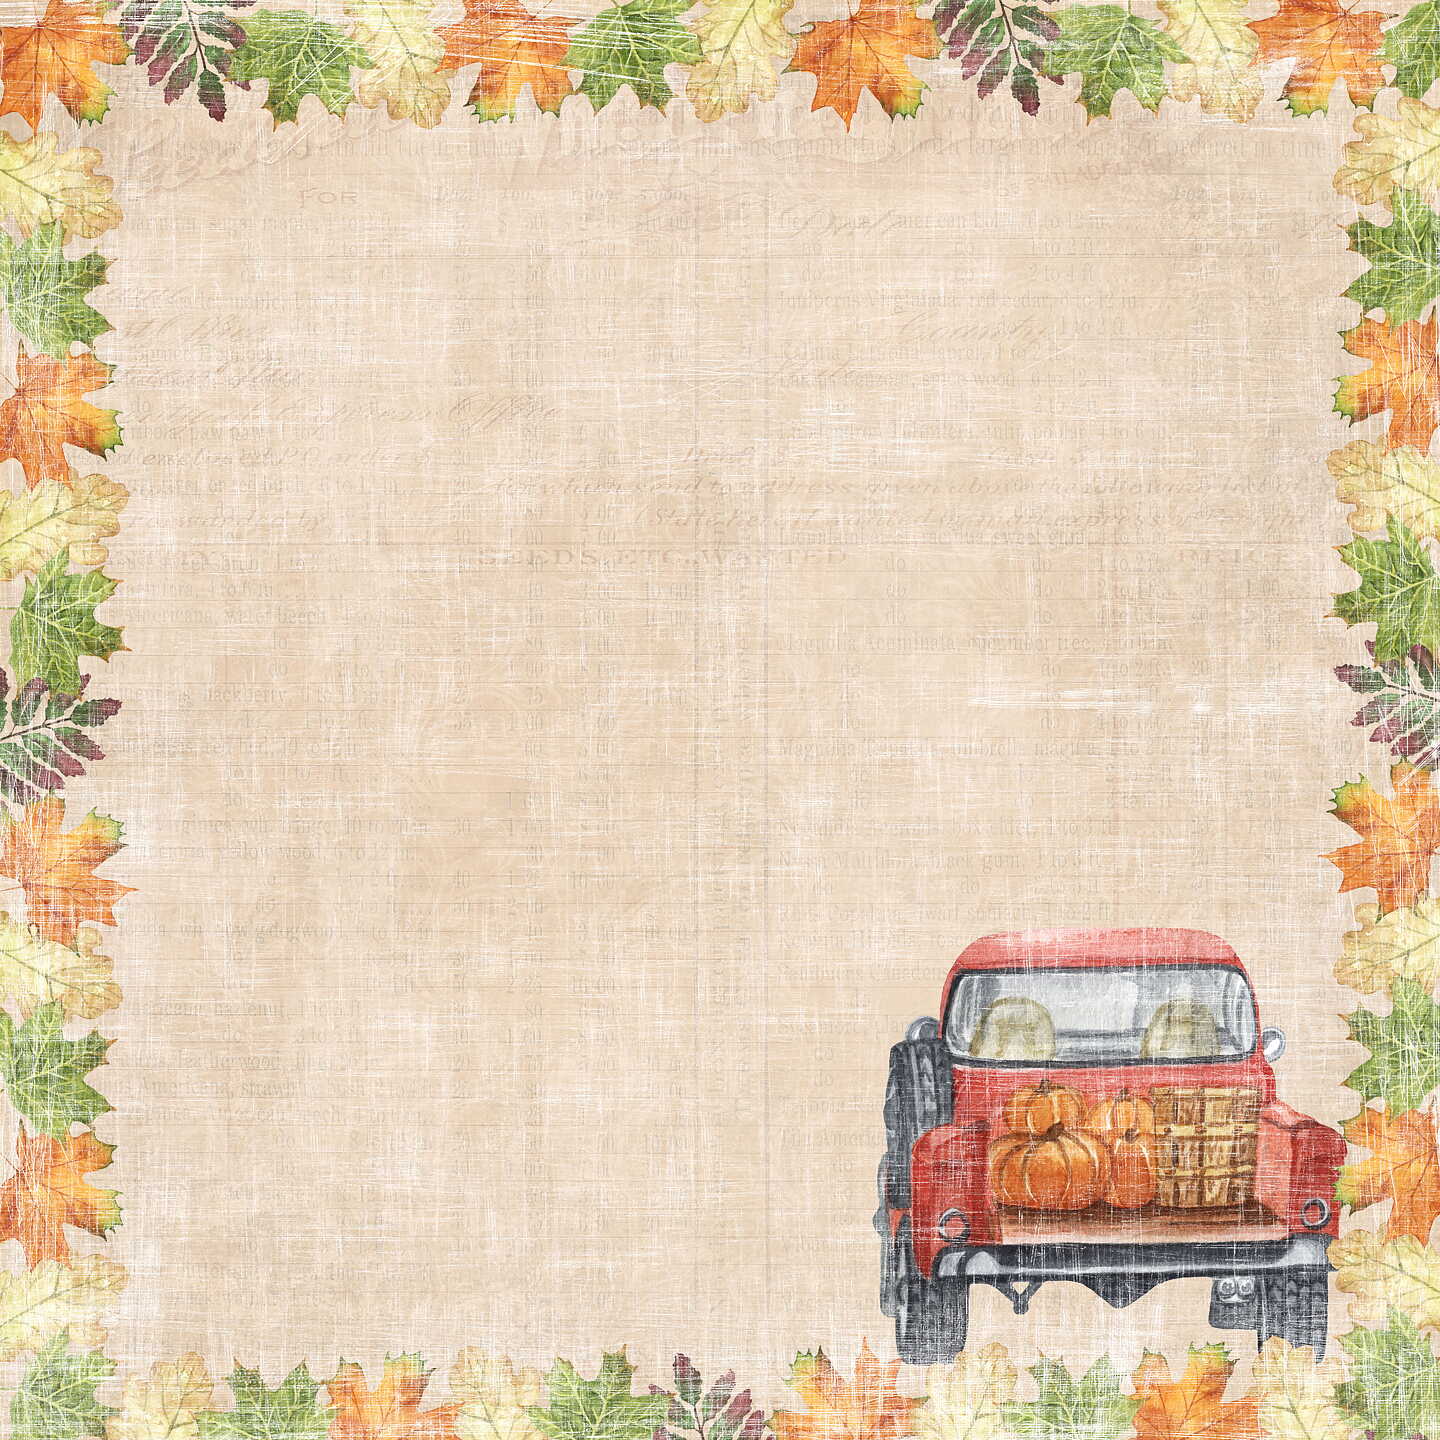 Reprint - Harvest Time Collection - Paperpack 12x12